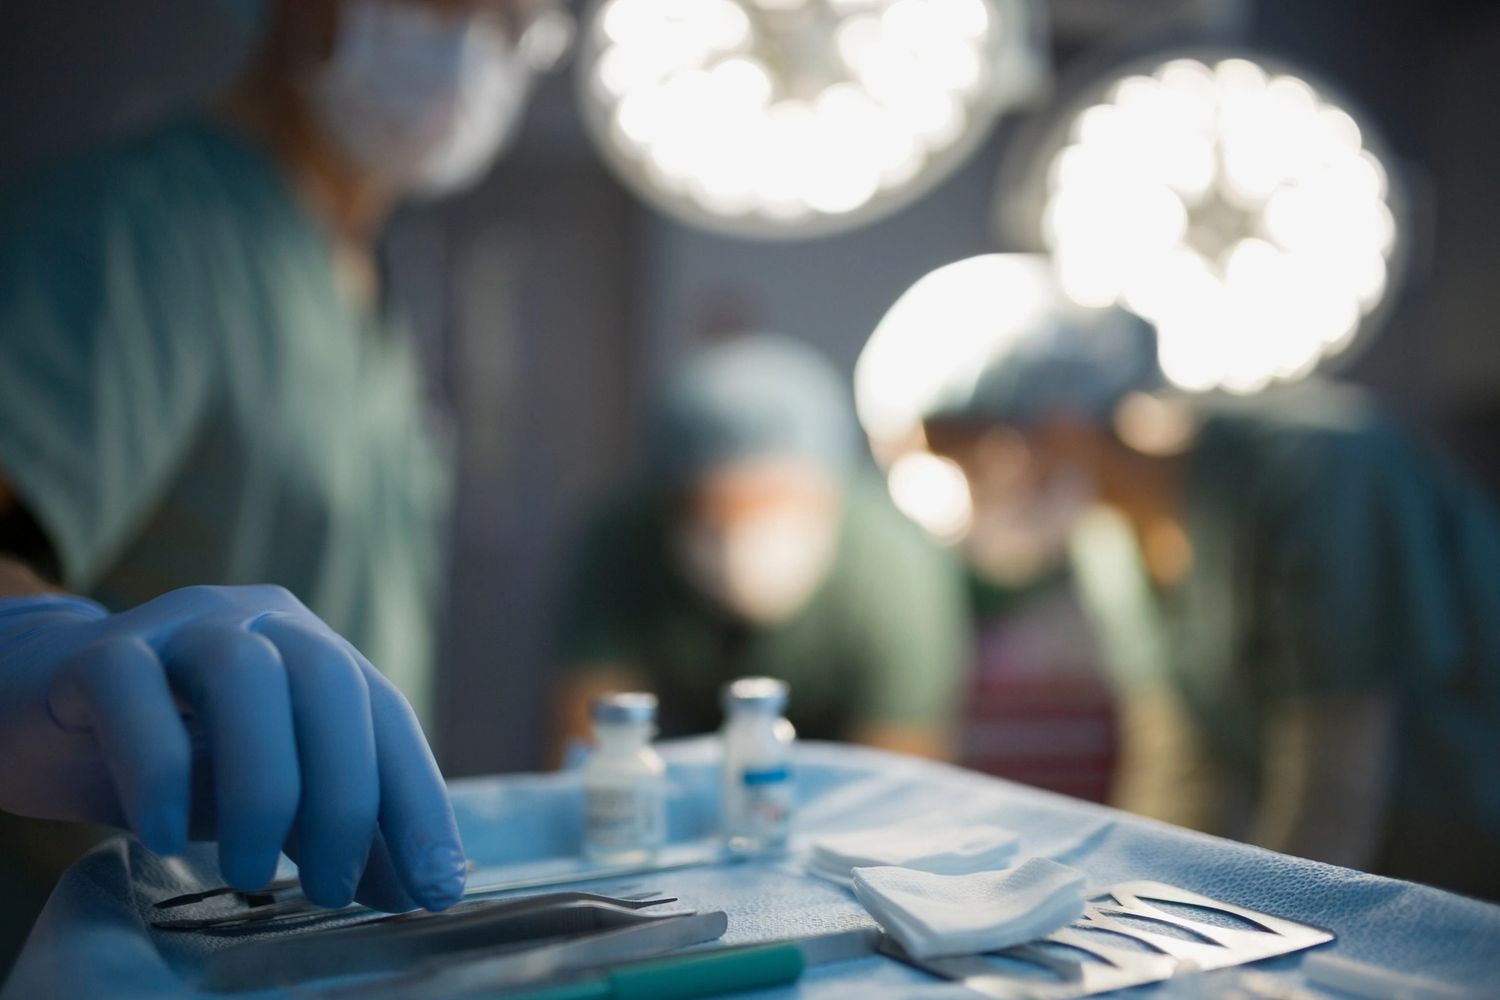 Surgeon reaching for scalpel during surgery. Drugs in foreground, medical assistants in background.